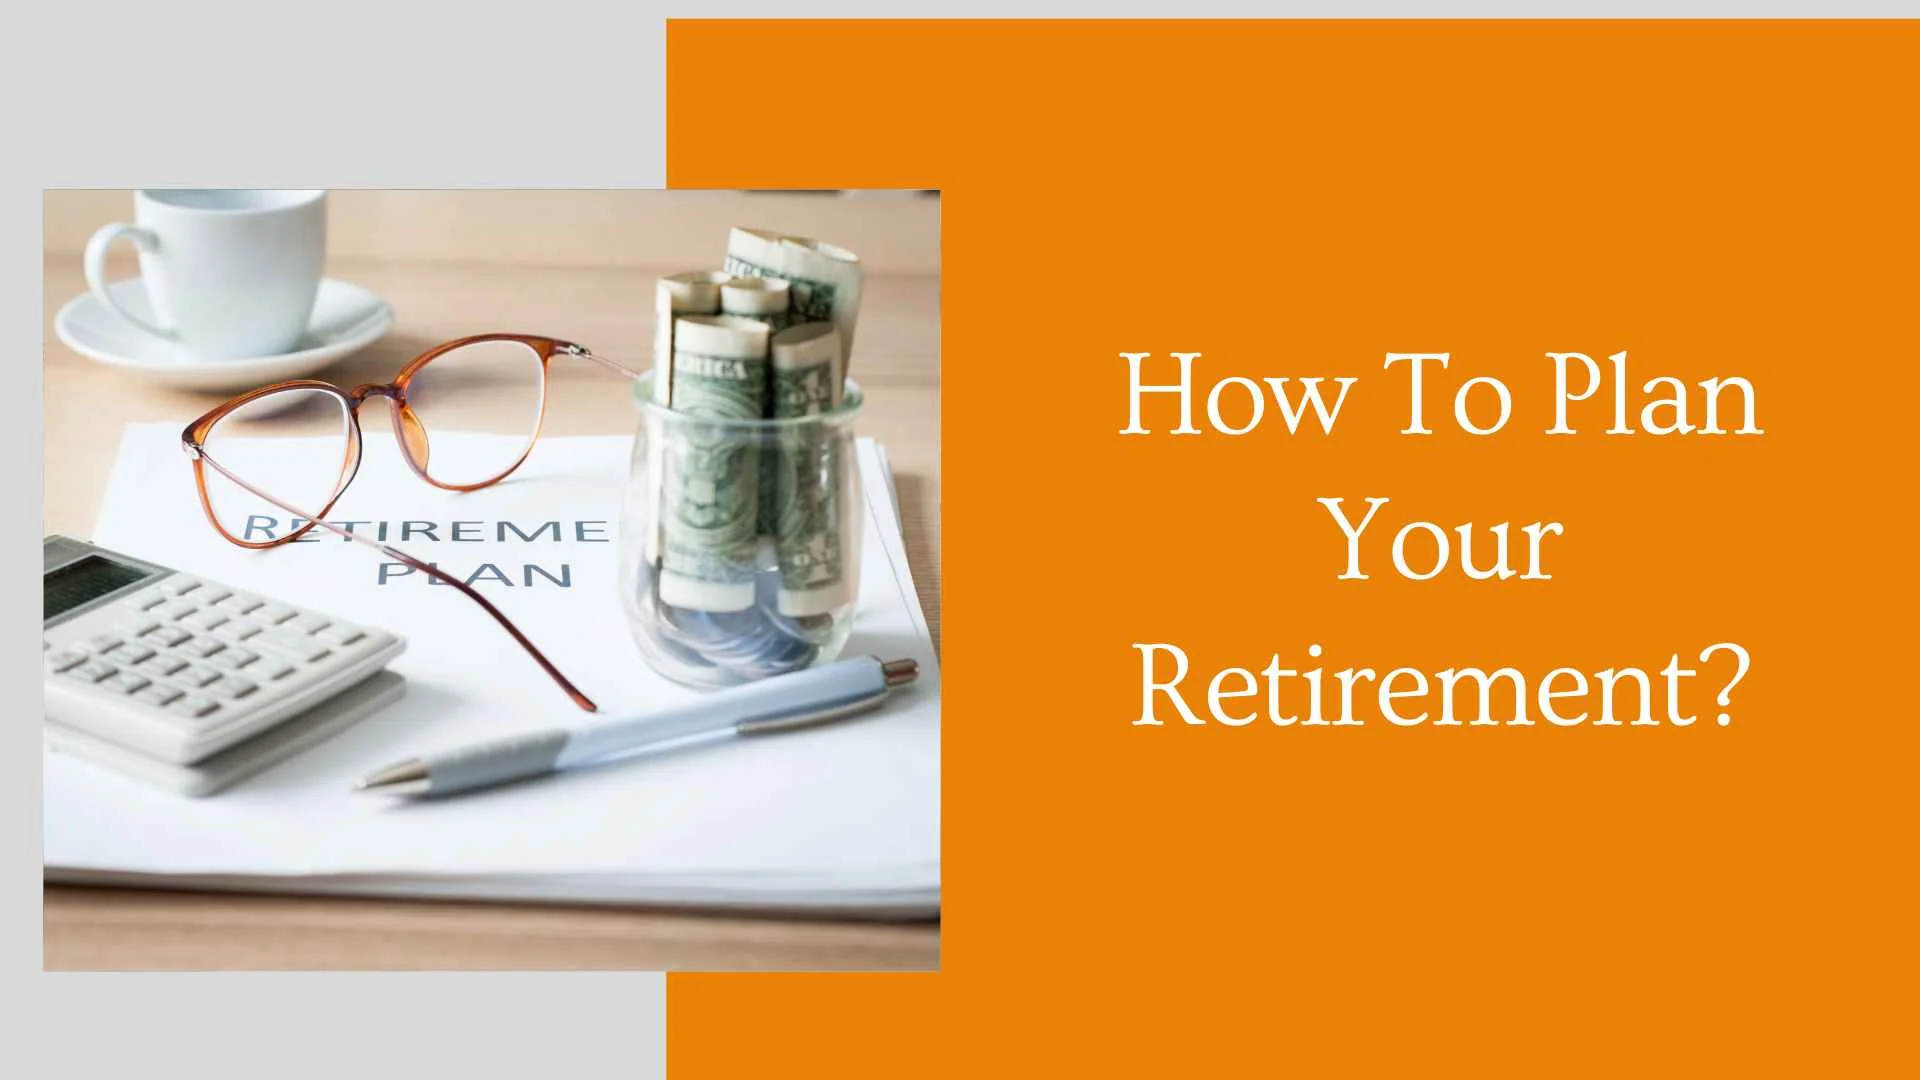 How To Plan Your Retirement